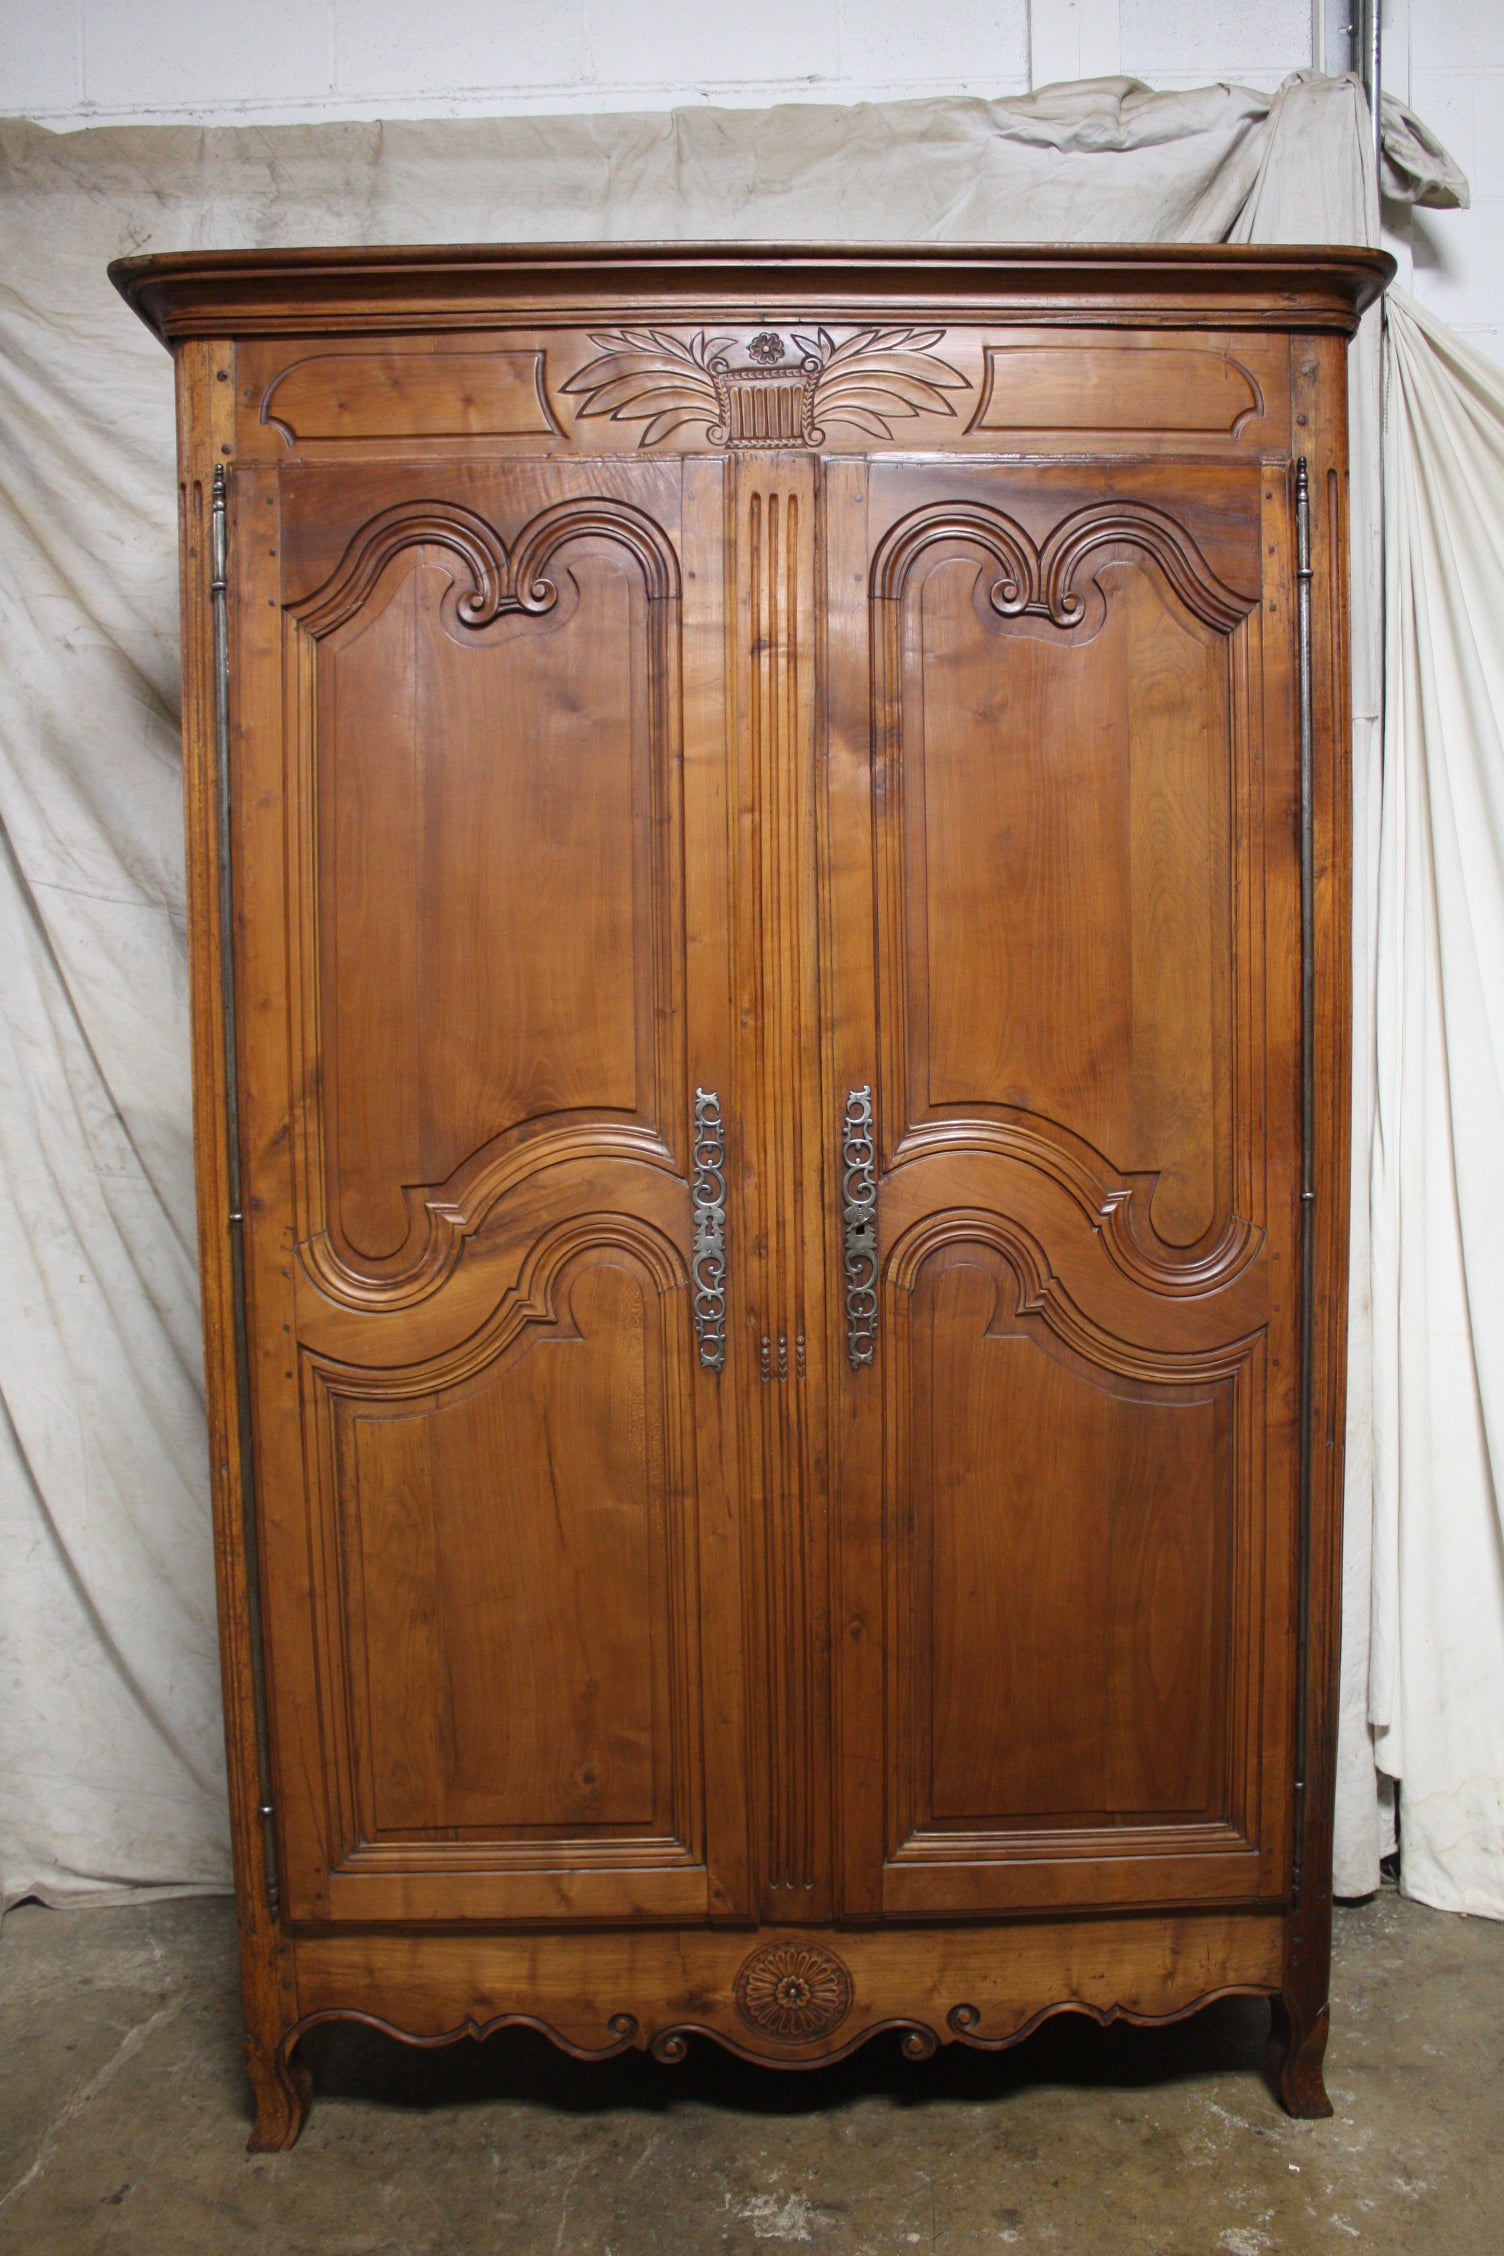 Simple line for a Louis XV Armoire in walnut. Very nice proportion, tall and narrow, beautiful piece.